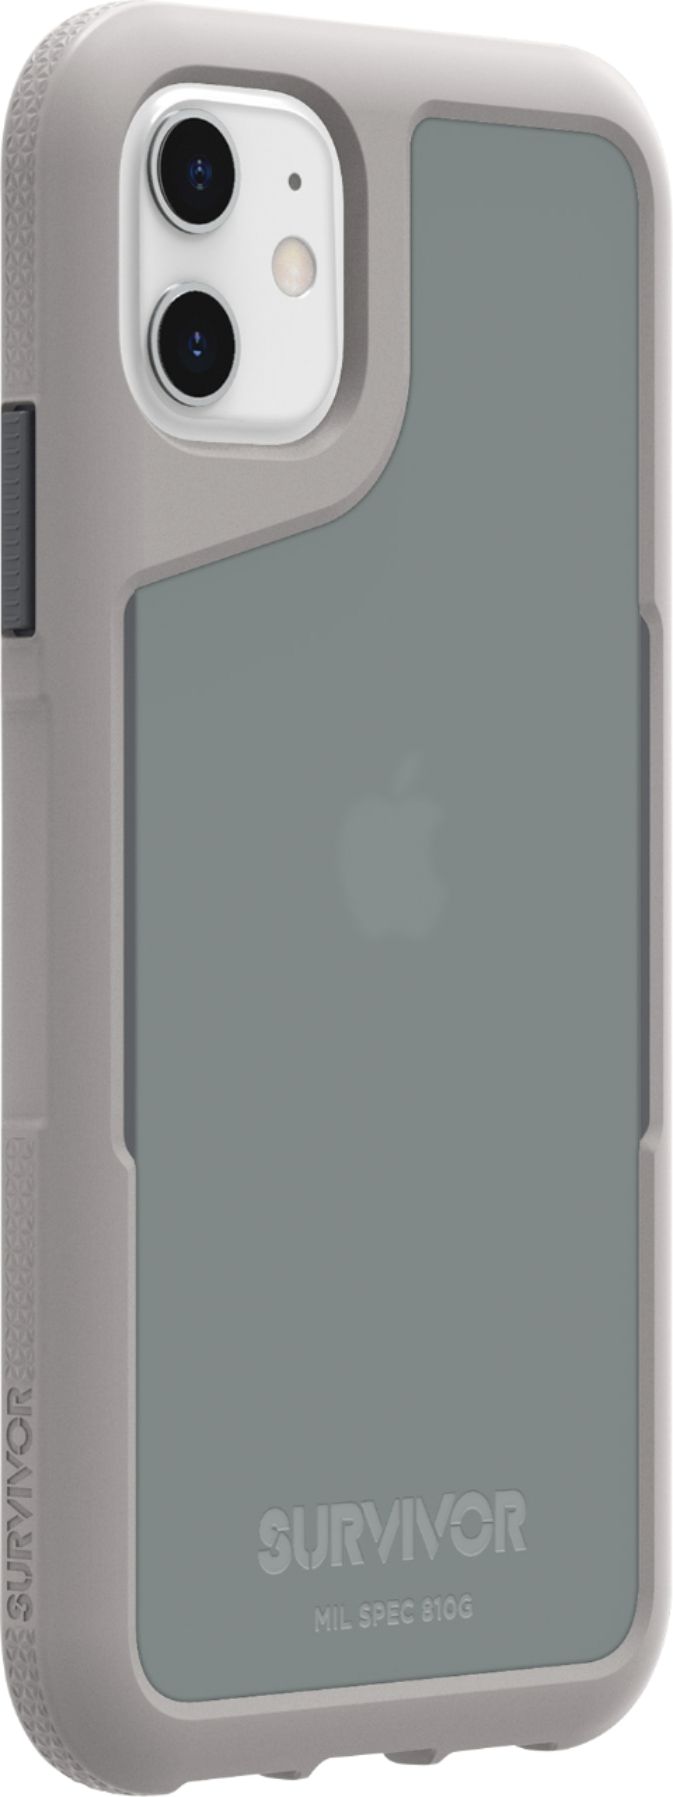 Angle View: Griffin Technology - Survivor Endurance Case for Apple® iPhone® 11 - Gray/Translucent